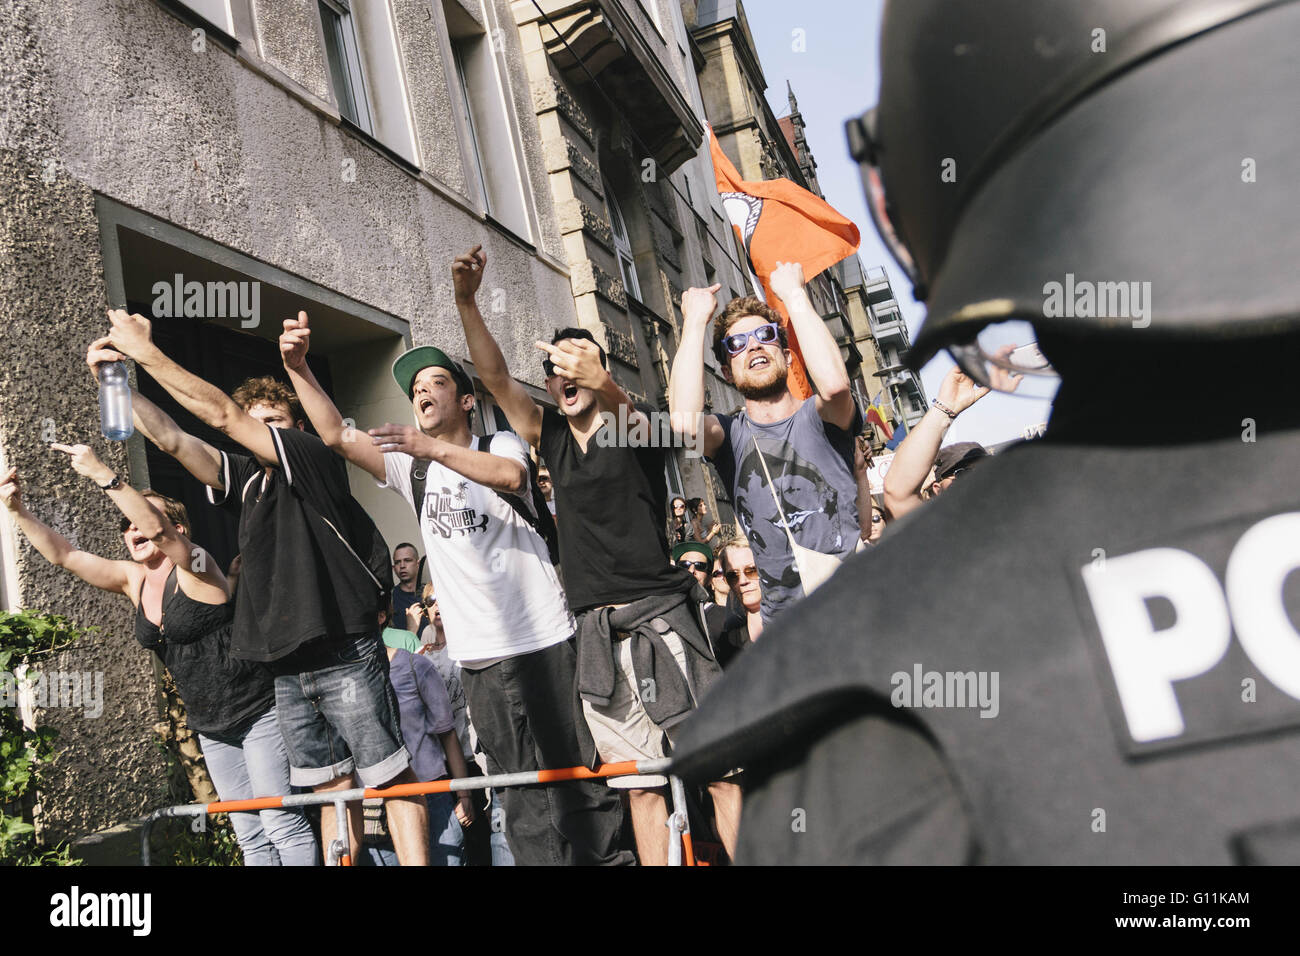 Berlin, Germany. 7th May, 2016. Activists during the counter protests against the rally held under the motto 'Merkel muss weg! or 'Merkel must go' organised by far-right group 'We for Berlin & We for Germany' © Jan Scheunert/ZUMA Wire/Alamy Live News Stock Photo